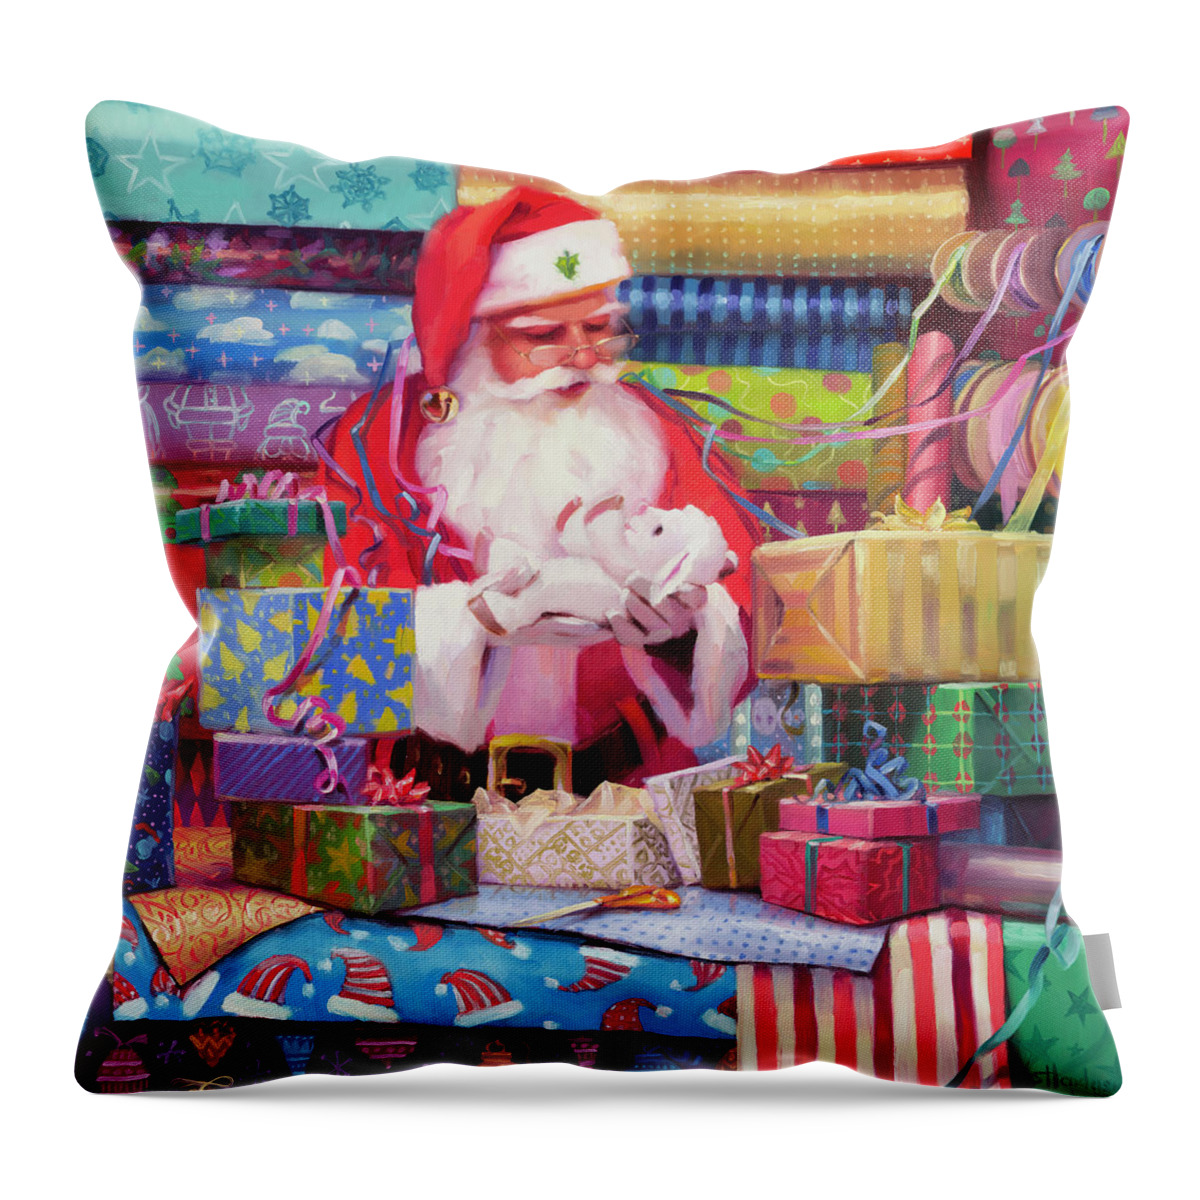 Santa Throw Pillow featuring the painting All Wrapped Up by Steve Henderson